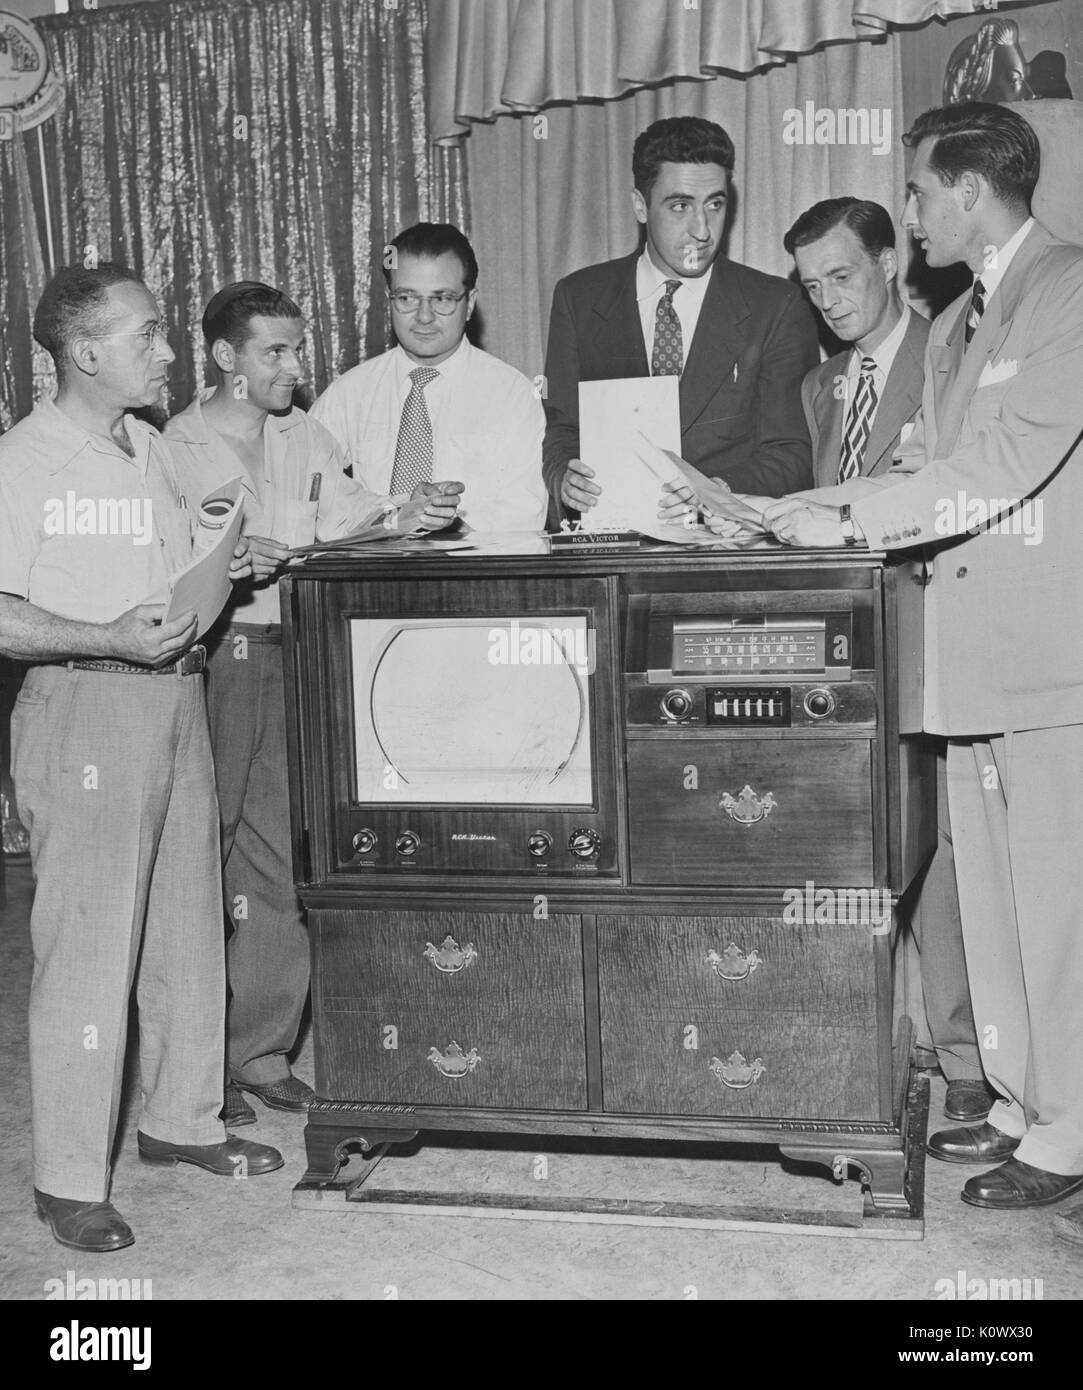 RCA Victor salesmen standing with a model 9TW390 television, reading information about the television during a sales meeting, 1950. Stock Photo